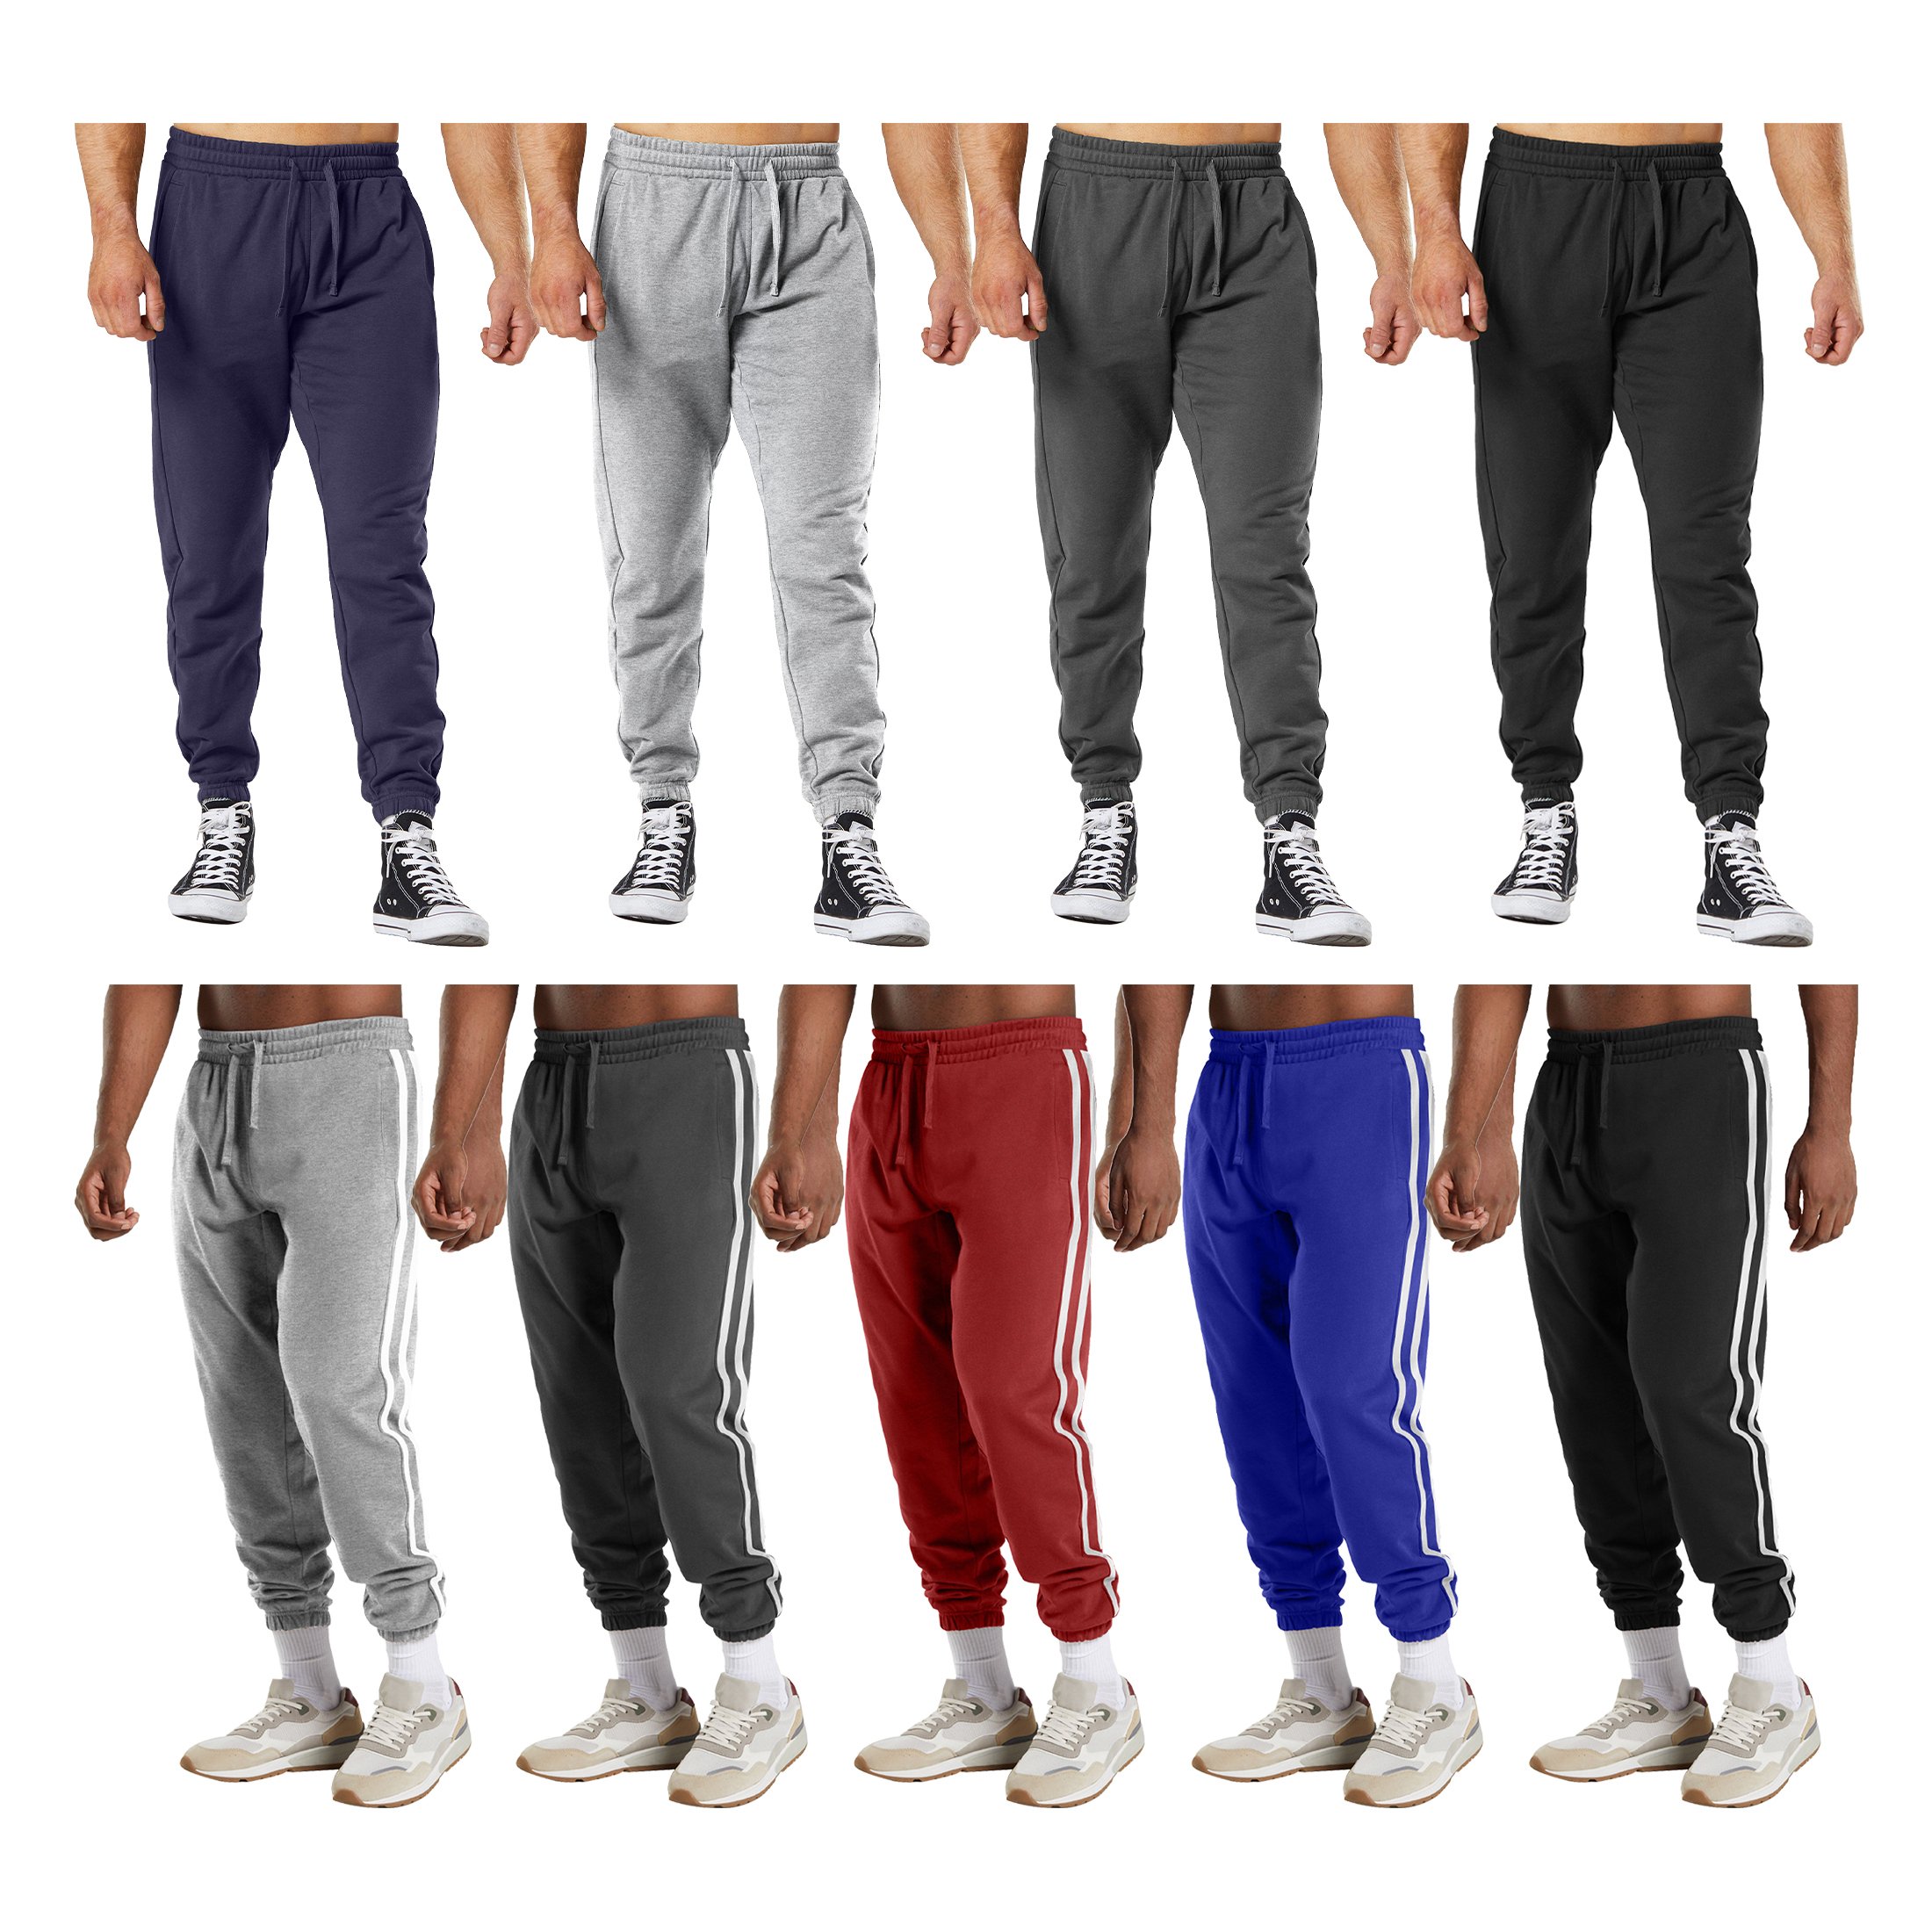 Multi-Pack: Men's Casual Fleece-Lined Elastic Bottom Jogger Pants With Pockets - 2-PACK, M